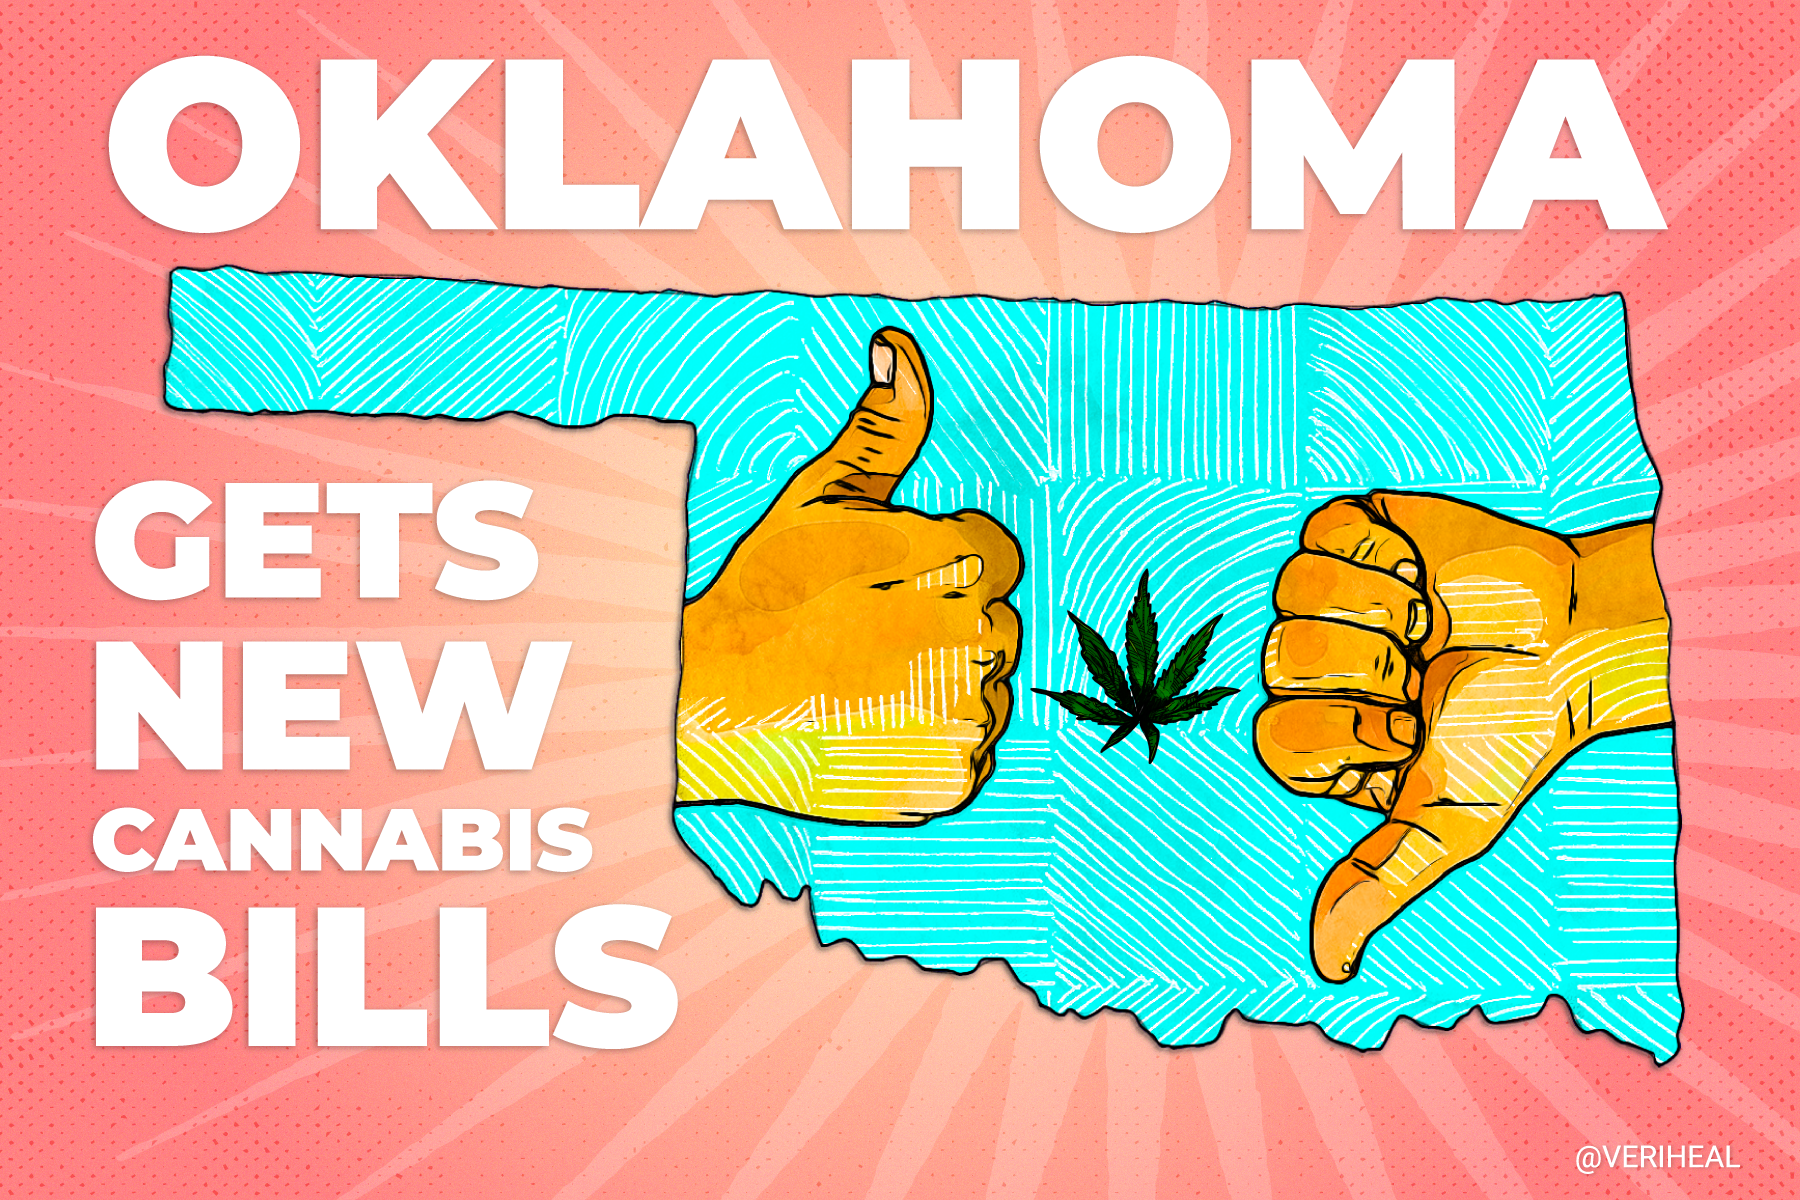 New Cannabis Bills Get Drafted in Oklahoma